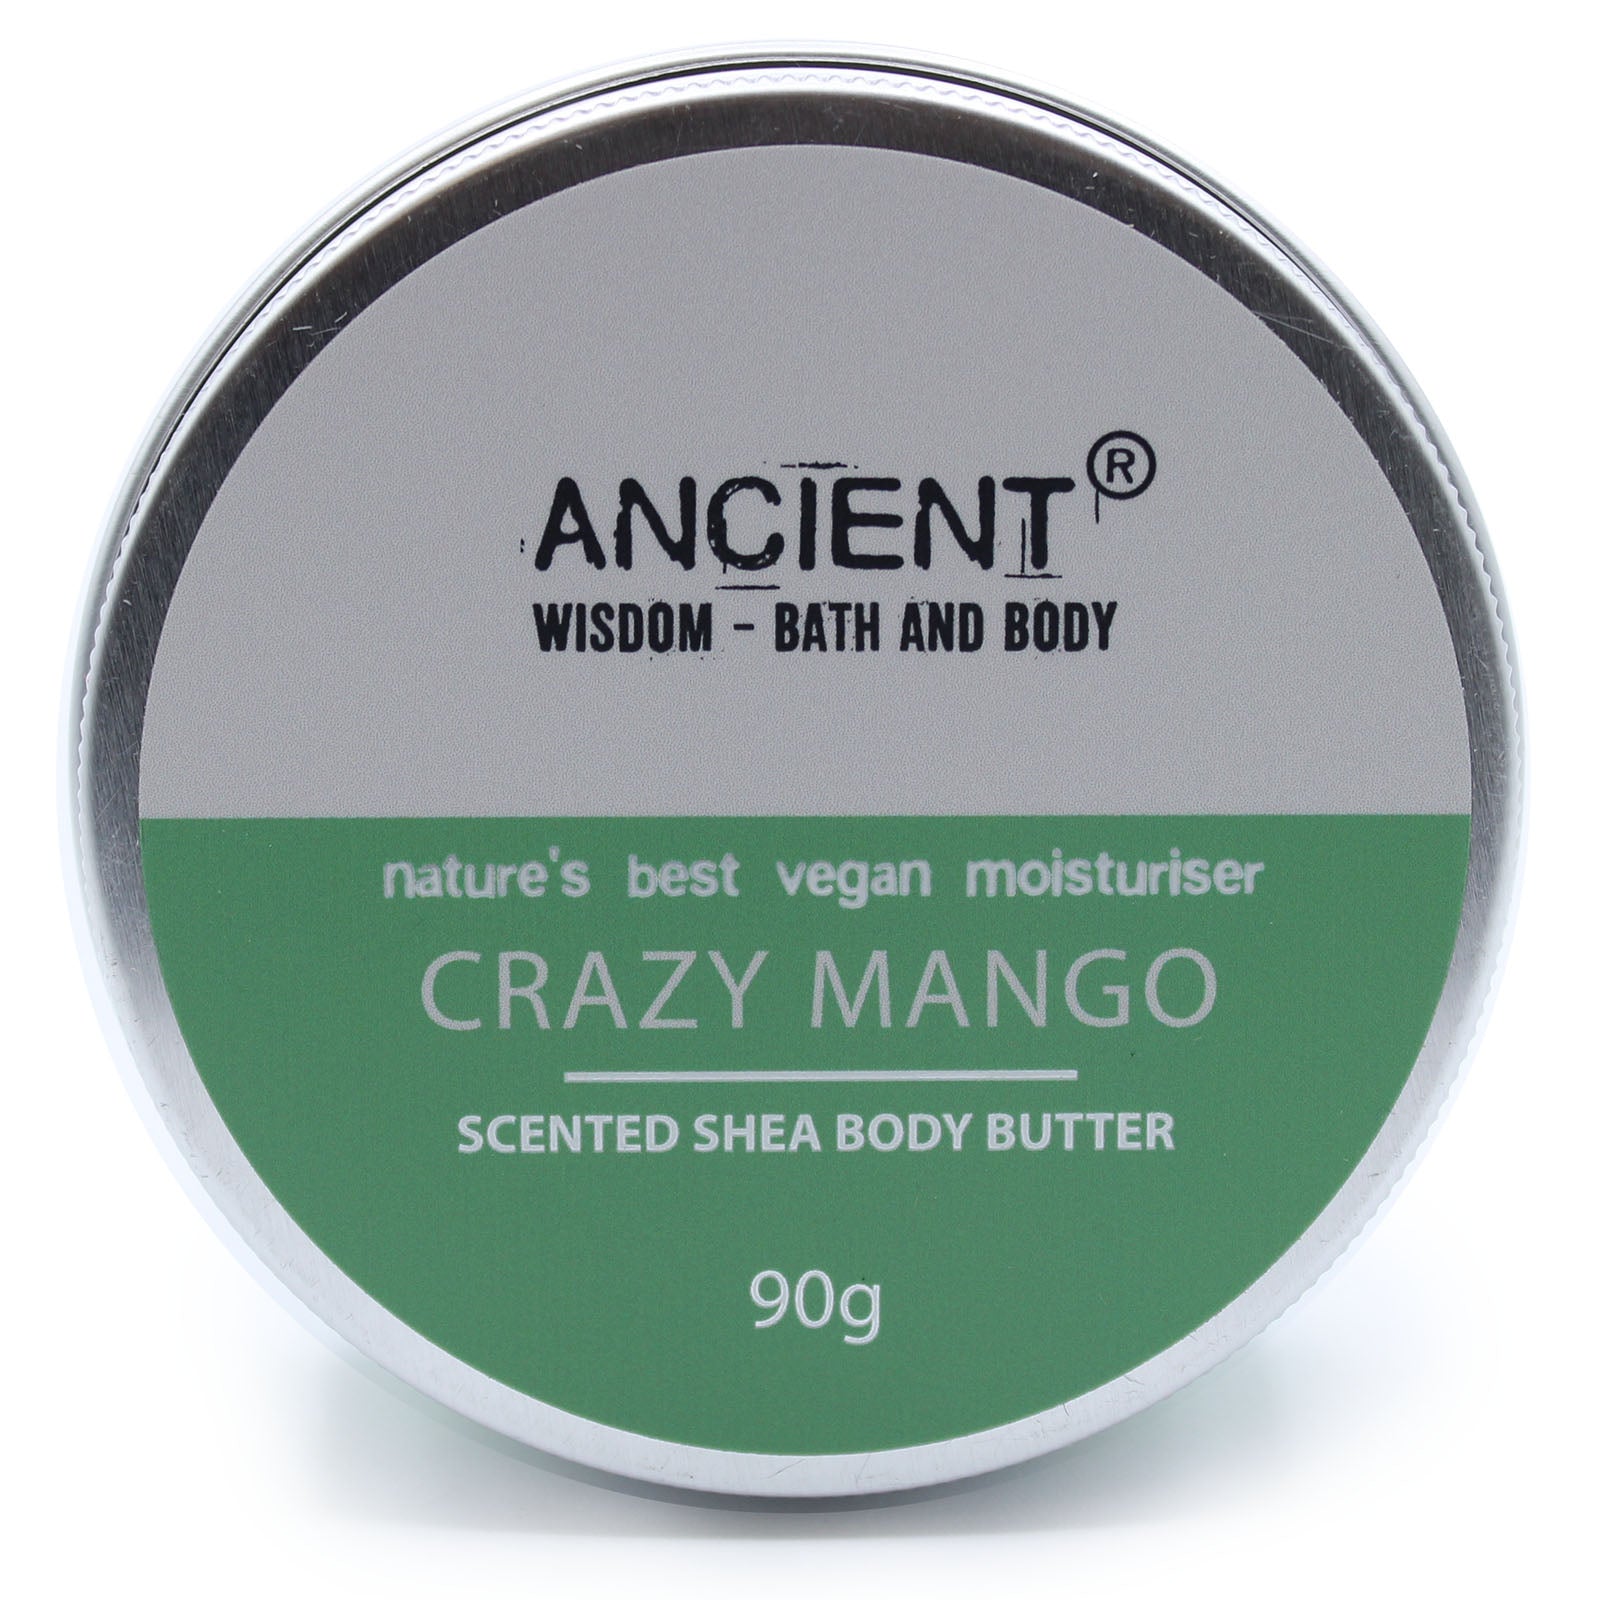 View Scented Shea Body Butter 90g Crazy Mango information